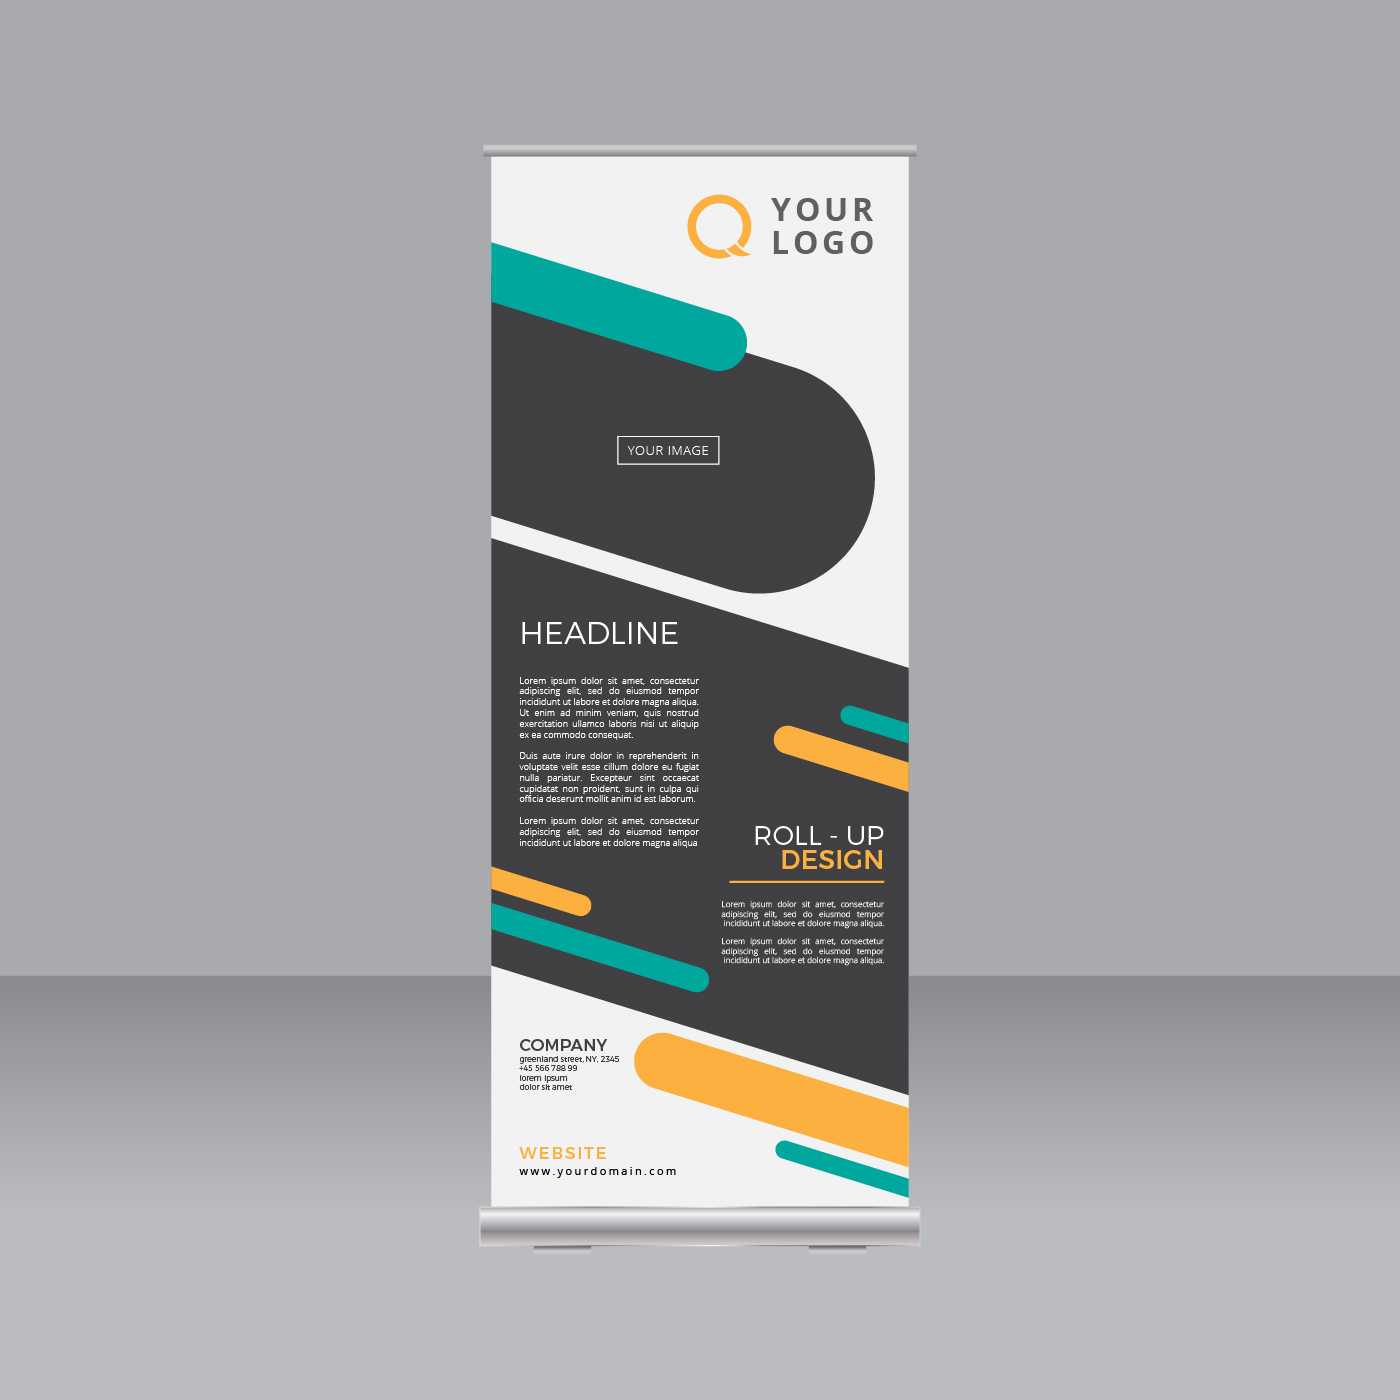 Roll Up Design Free Vector Art – (35,206 Free Downloads) For Retractable Banner Design Templates